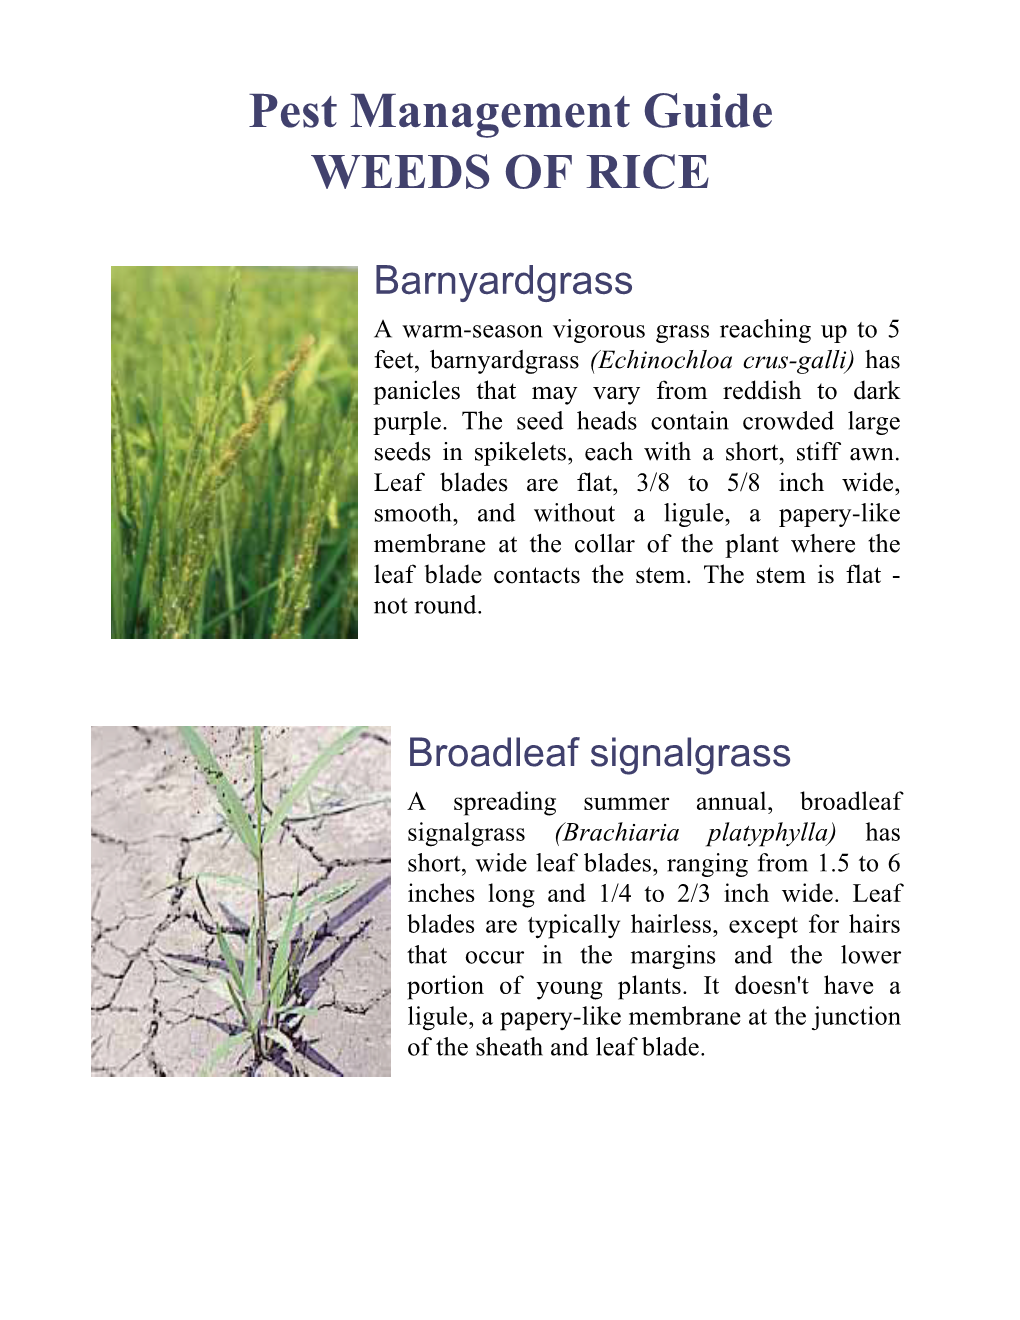 Pest Management Guide WEEDS of RICE